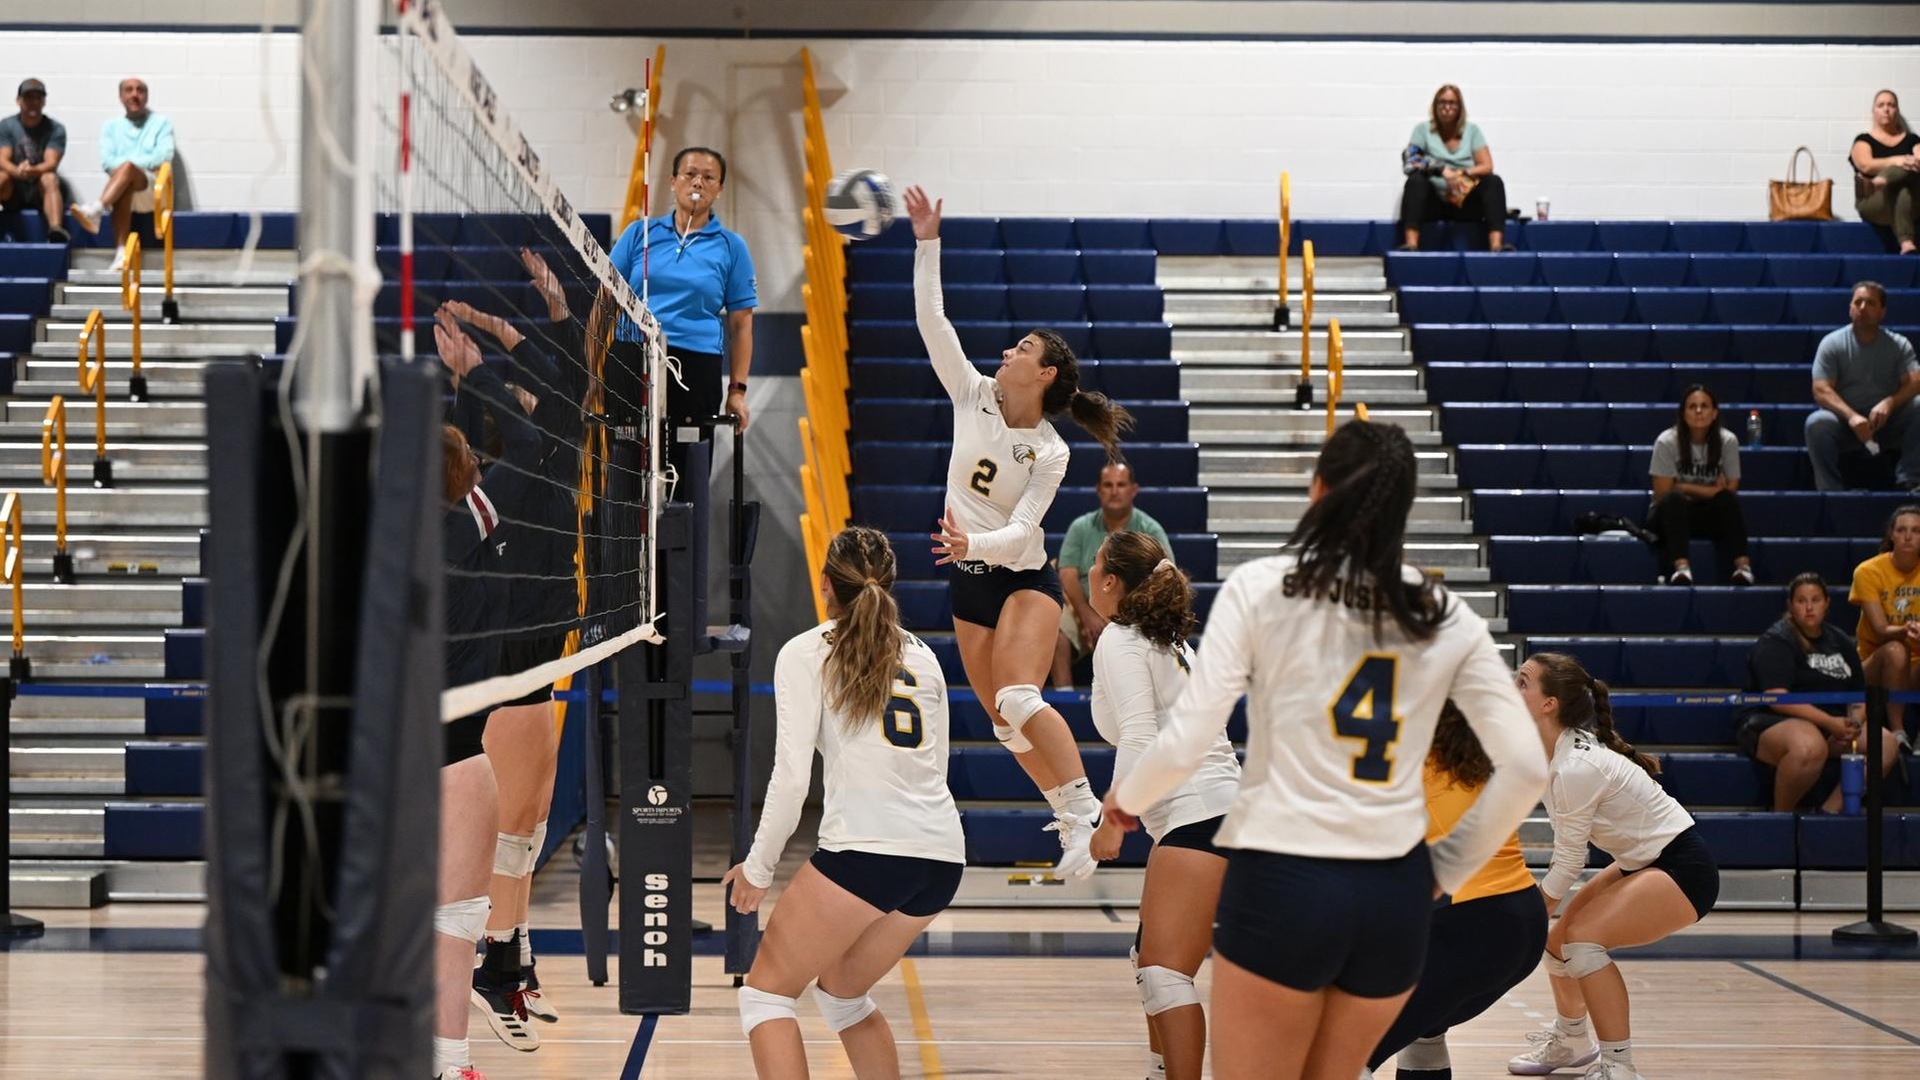 Women's Volleyball Drops Non-Conference Contest to West Conn, 3-1